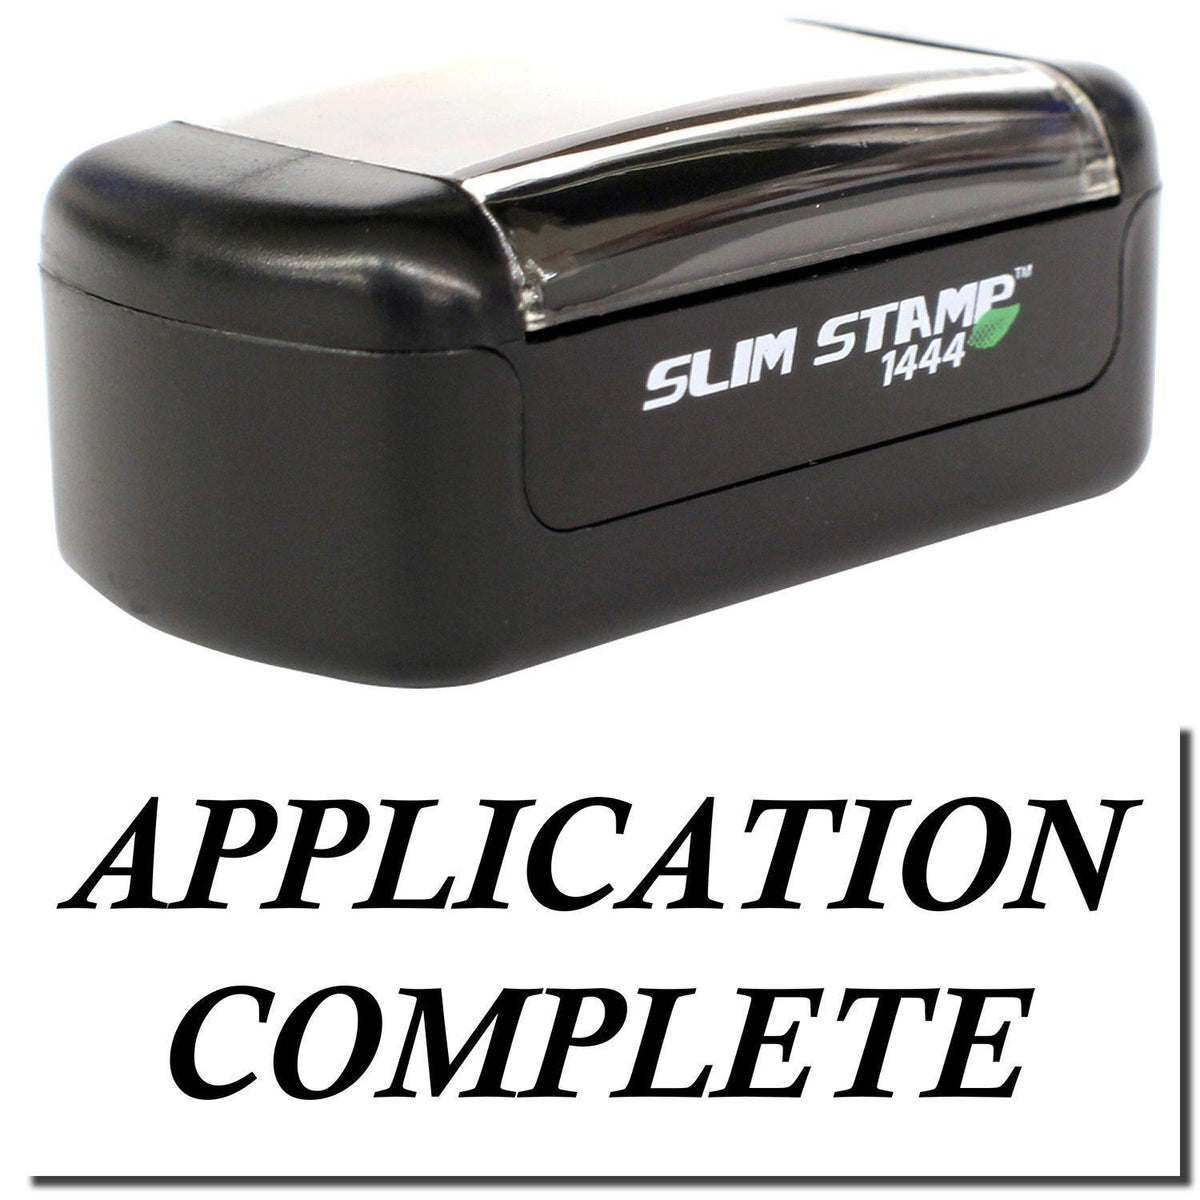 A stock office pre-inked stamp with a stamped image showing how the text &quot;APPLICATION COMPLETE&quot; is displayed after stamping.